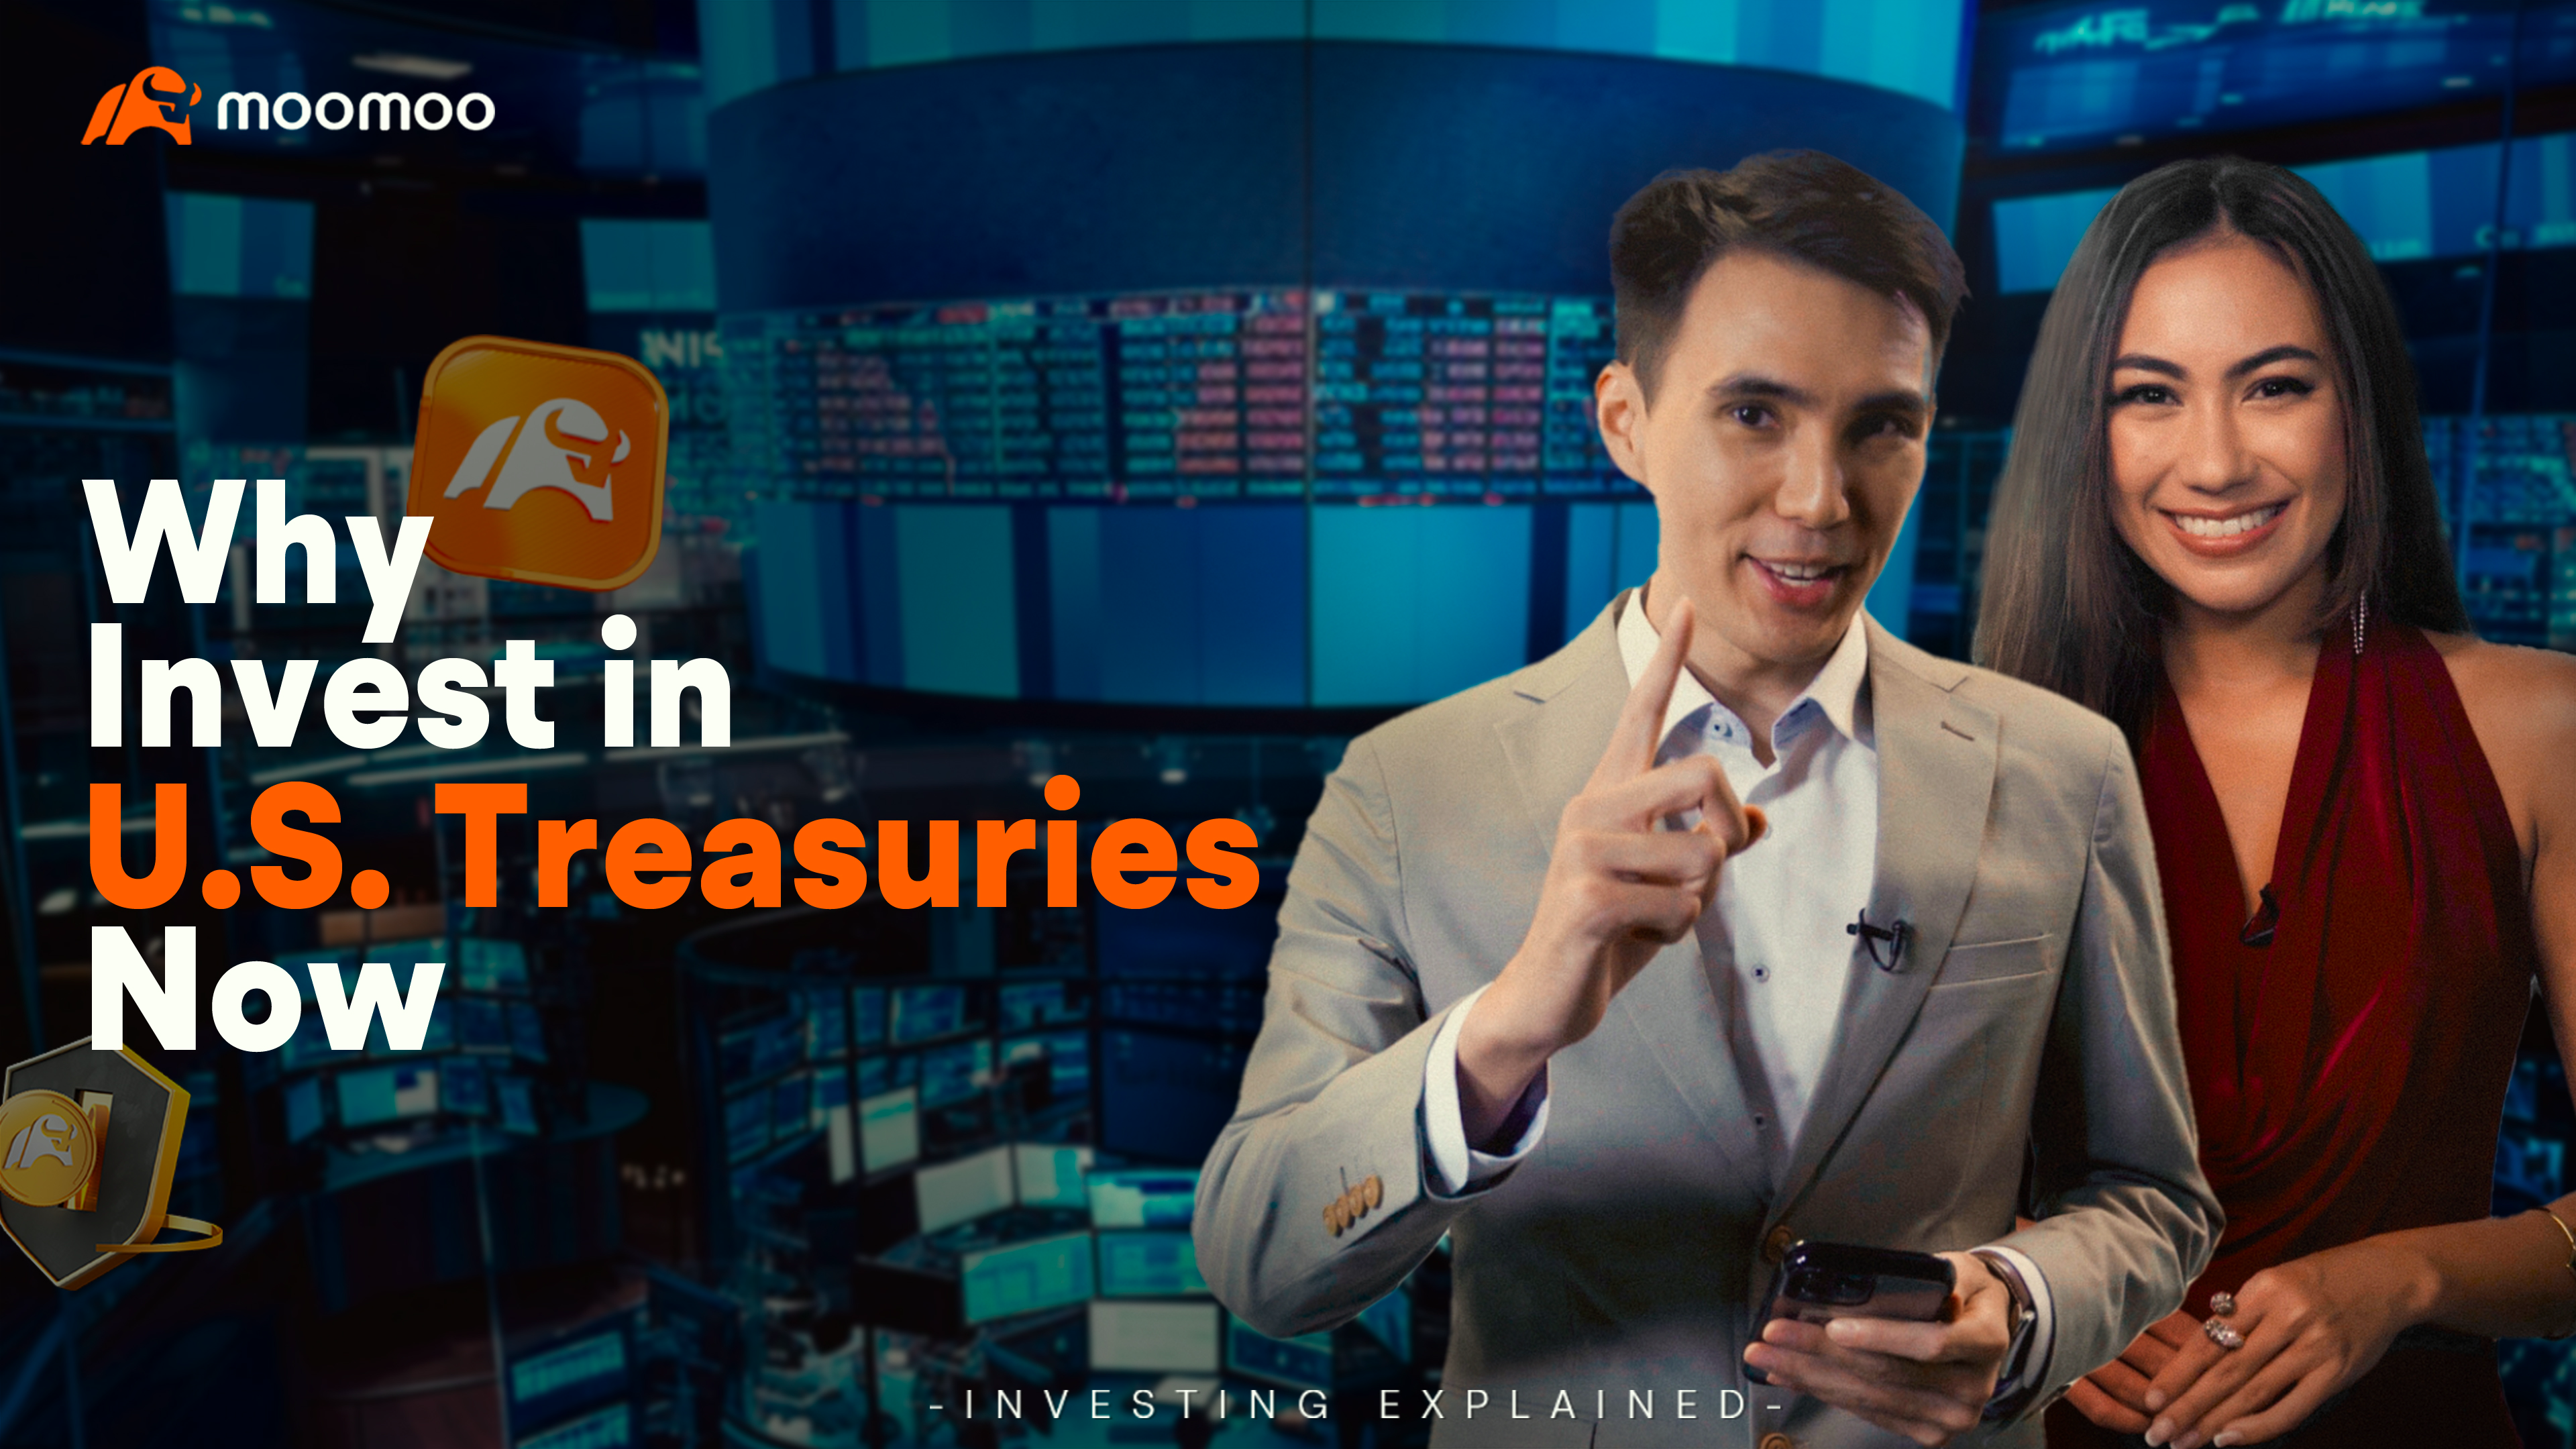 Is it prime time to invest in U.S. Treasuries now? Find out here